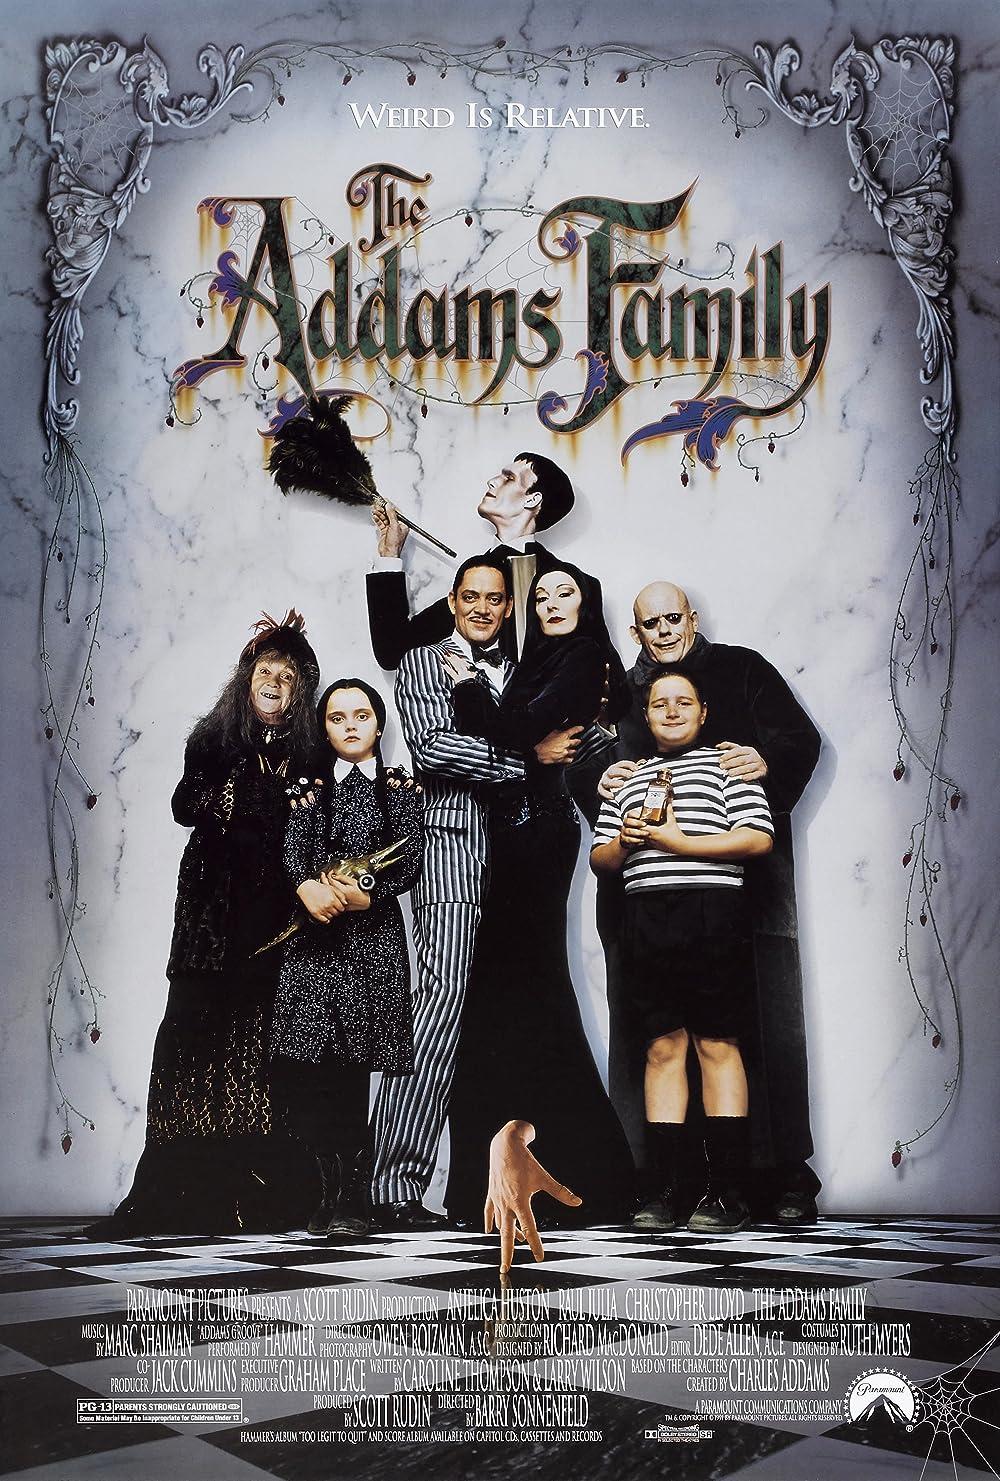 La famille Addams - The Artists Alley